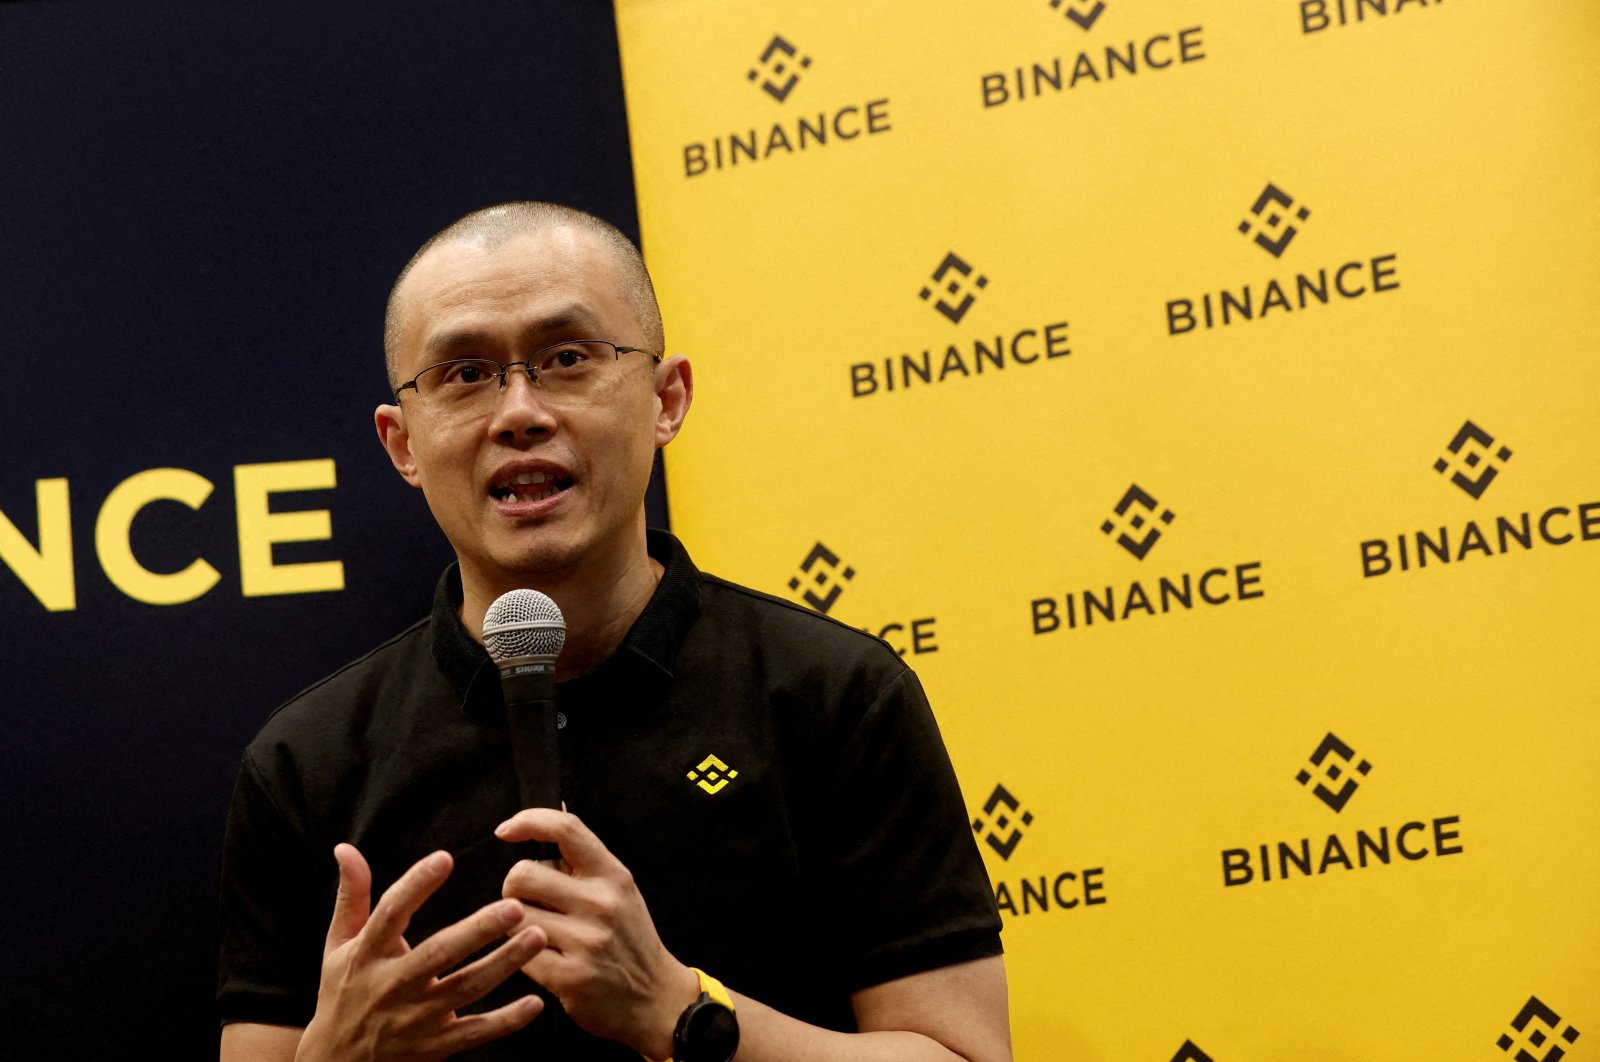 Zhao Changpeng, founder and chief executive officer of Binance, at the Viva Technology conference in Paris, France, June 16, 2022. (Reuters Photo)